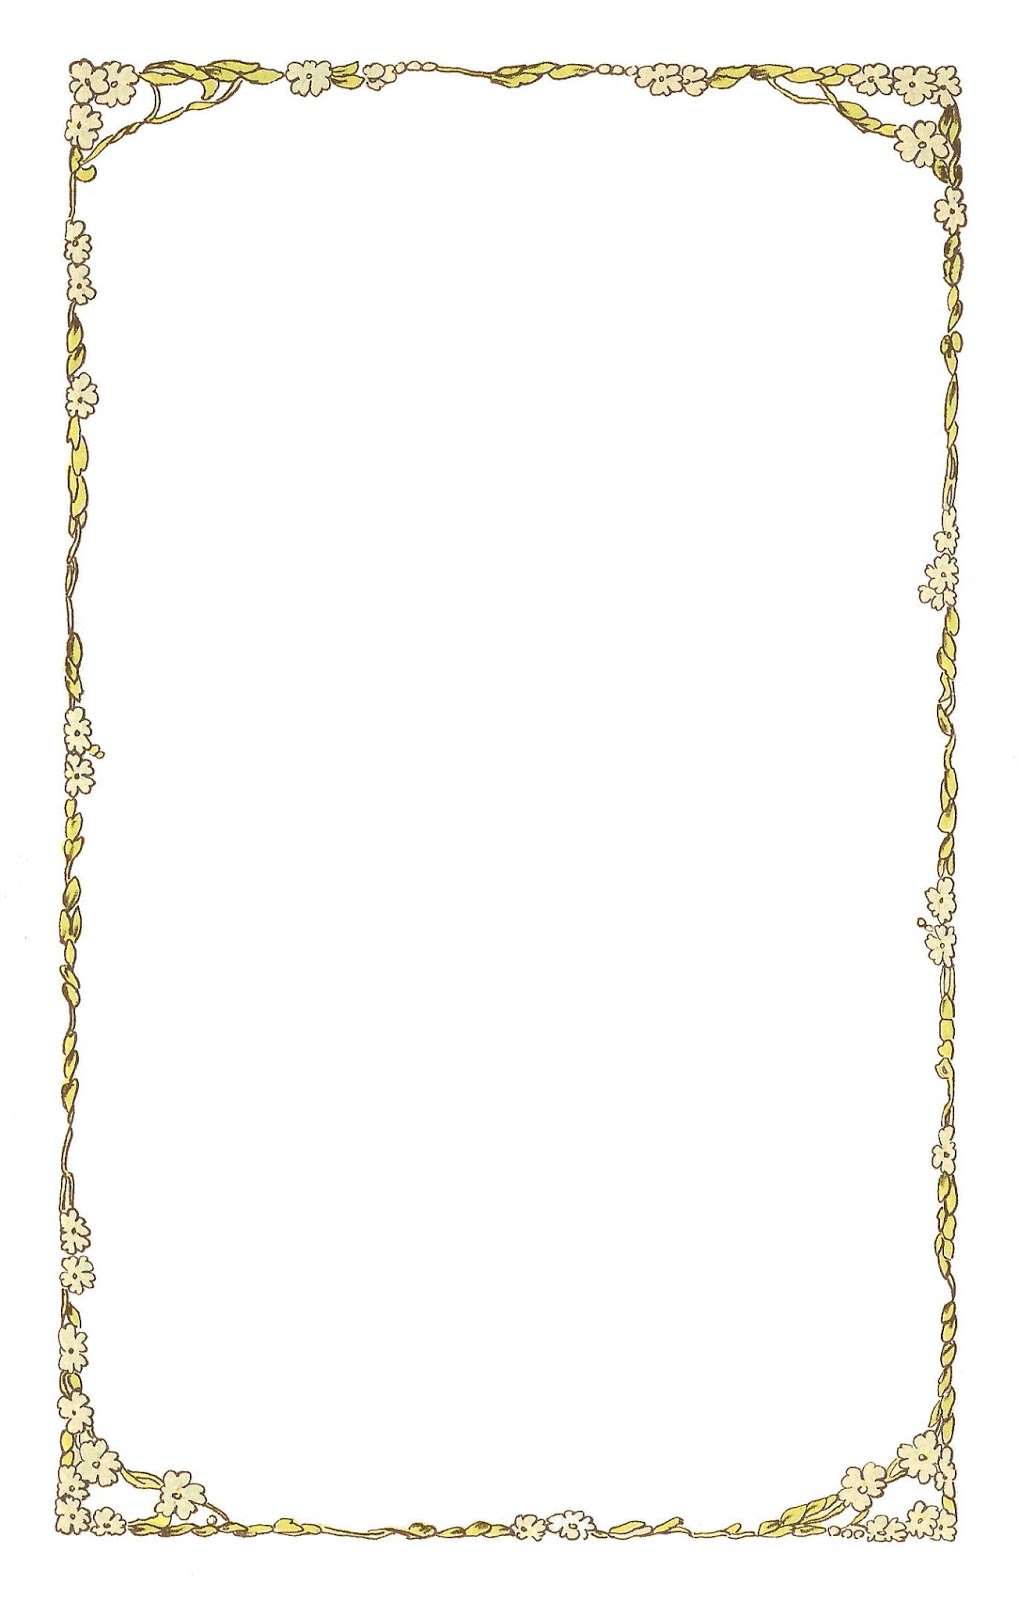 Frame welcome border clipart clipart kid